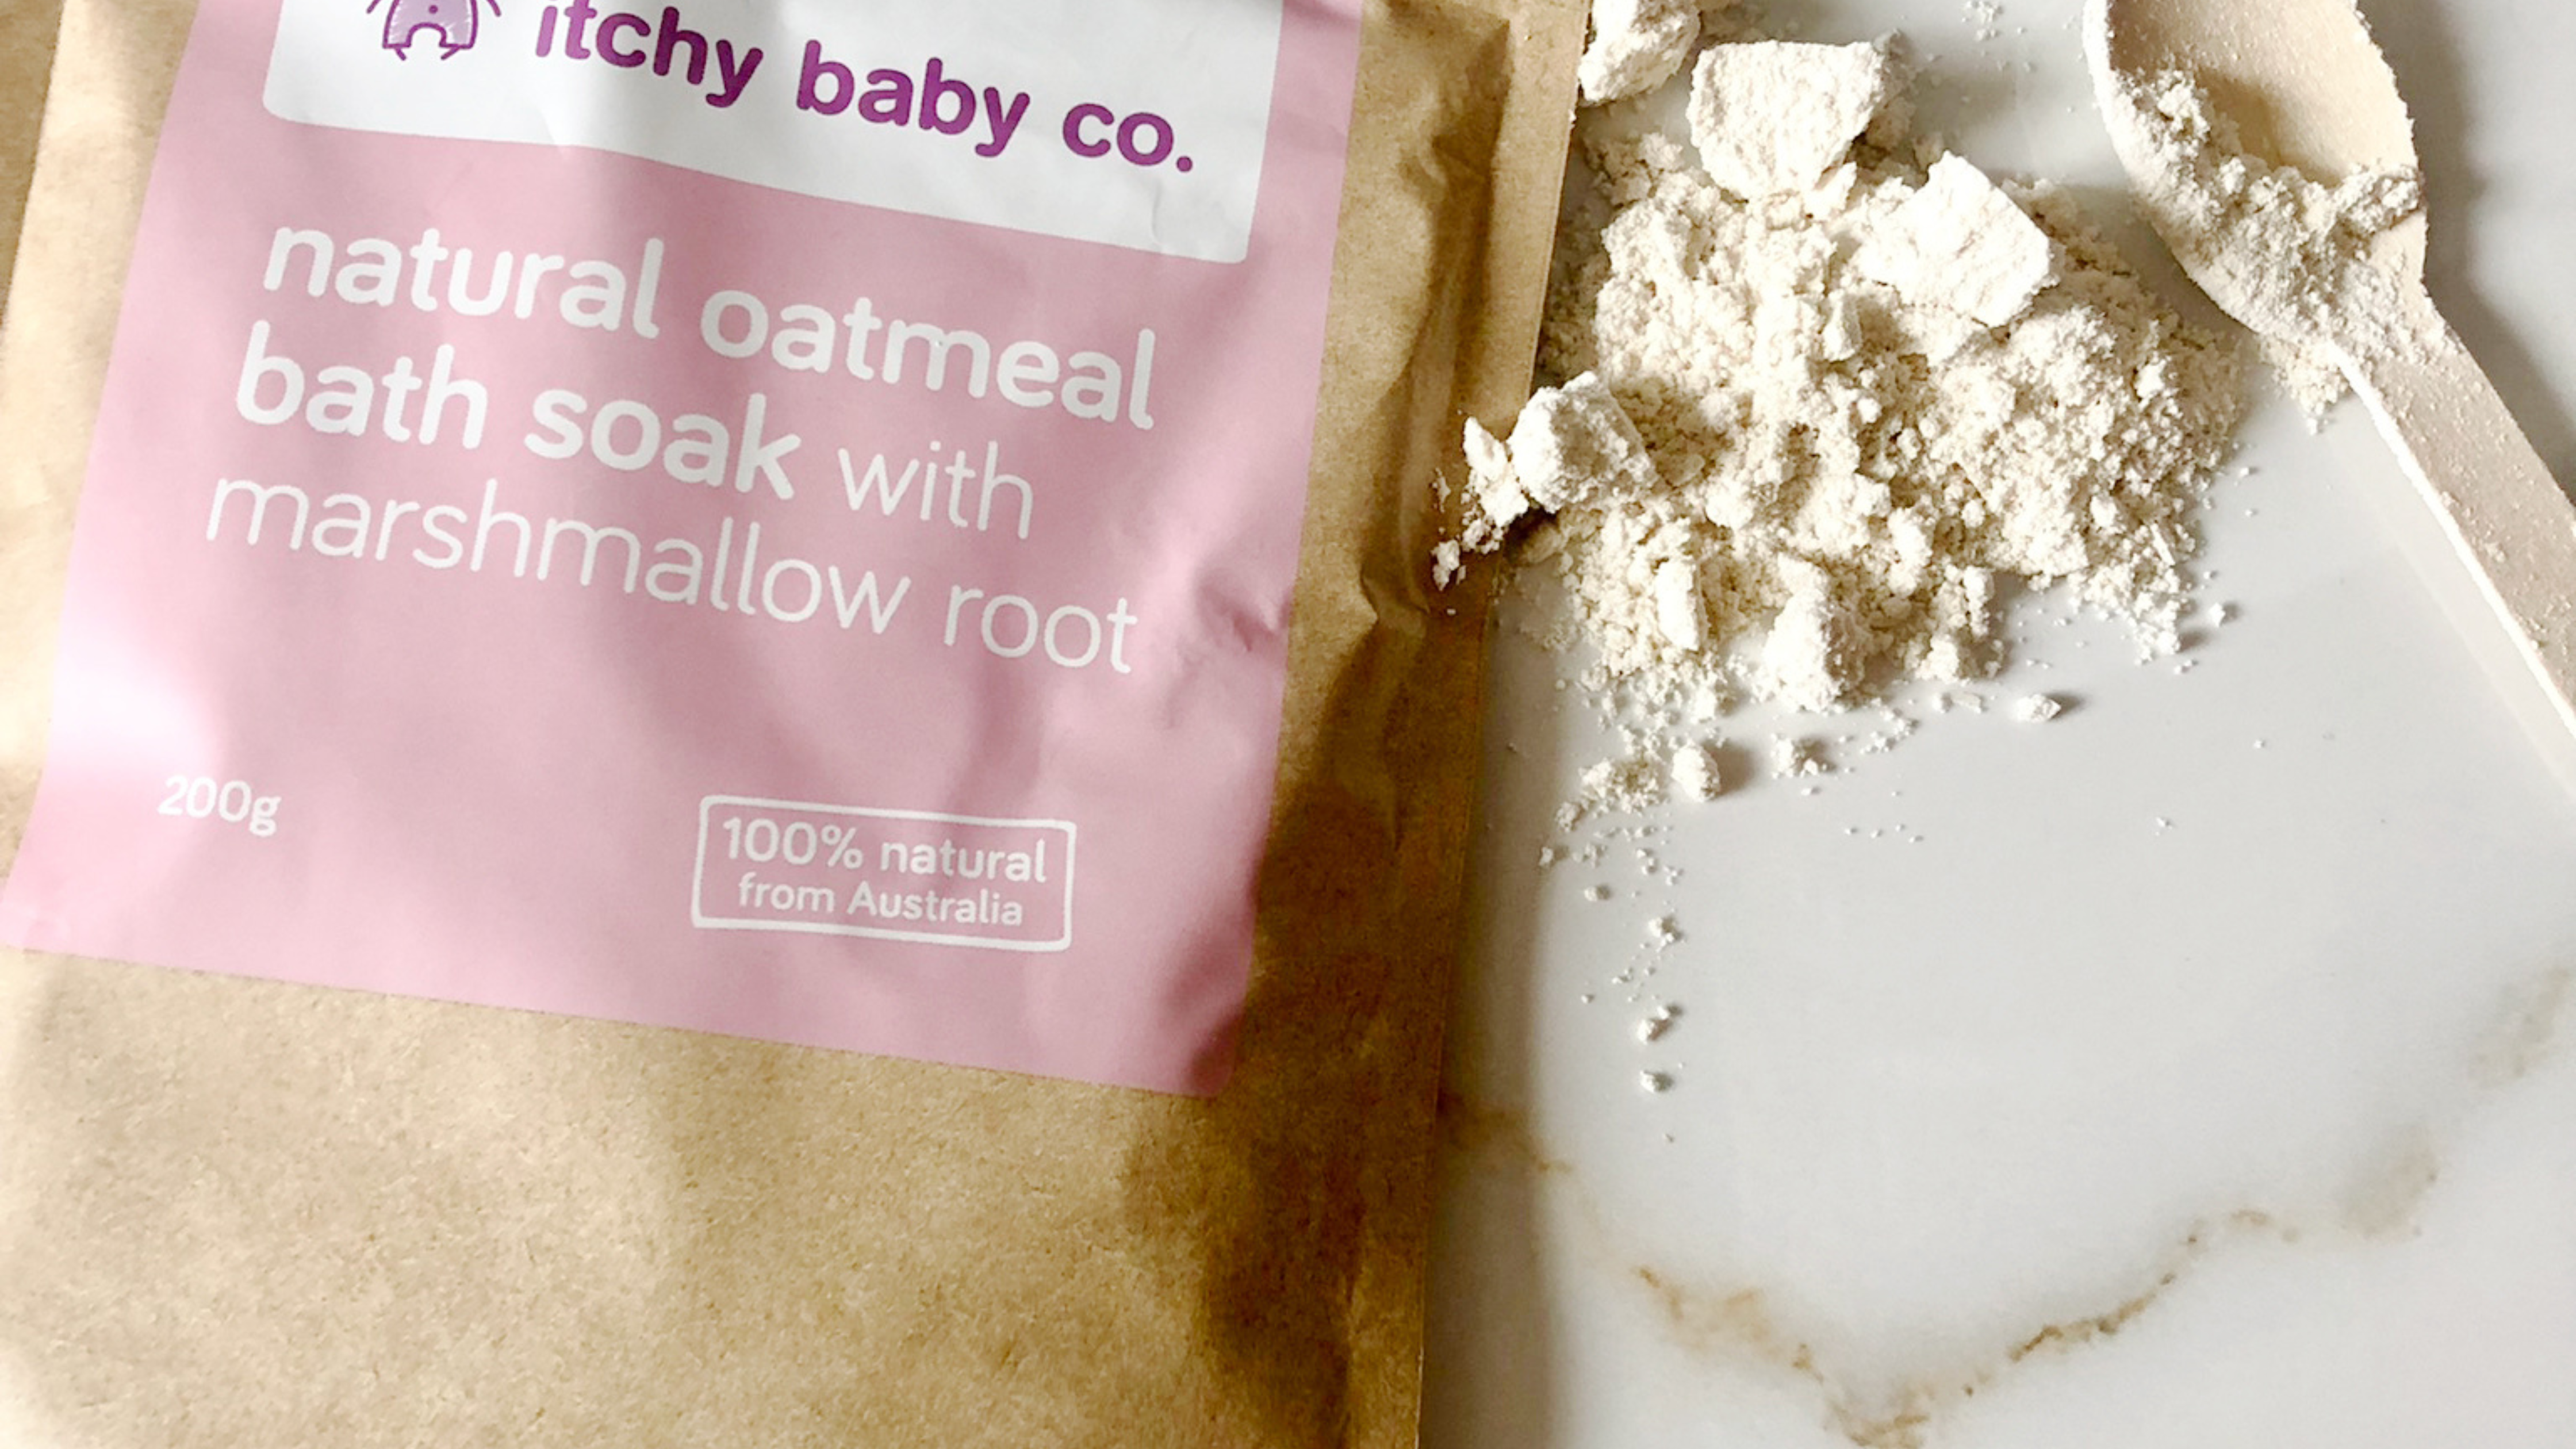 What Is Colloidal Oatmeal and Its Benefits?